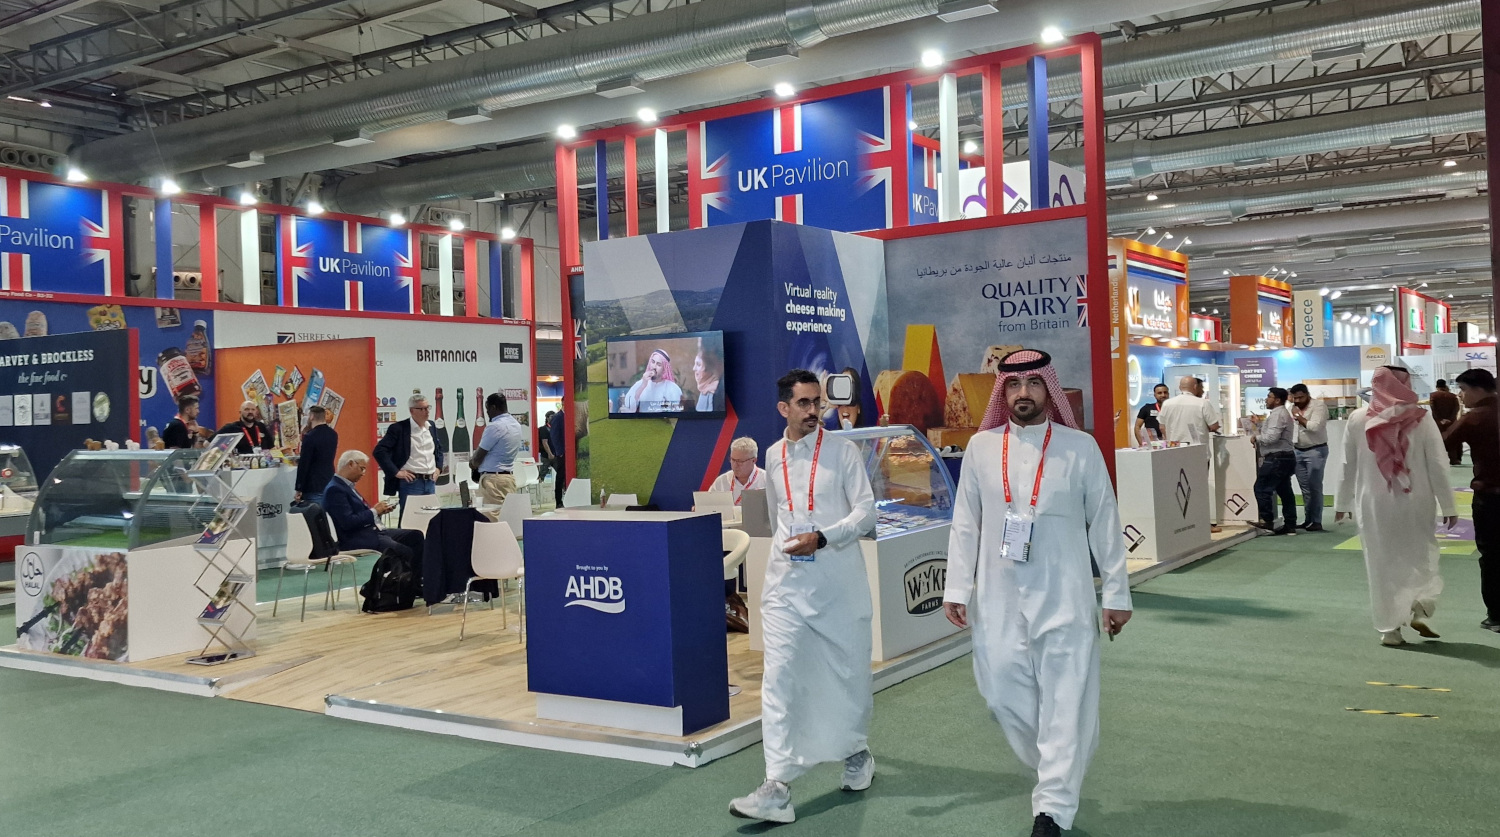 Two people walking past the UK pavilion at the Saudi Arabia trade show.